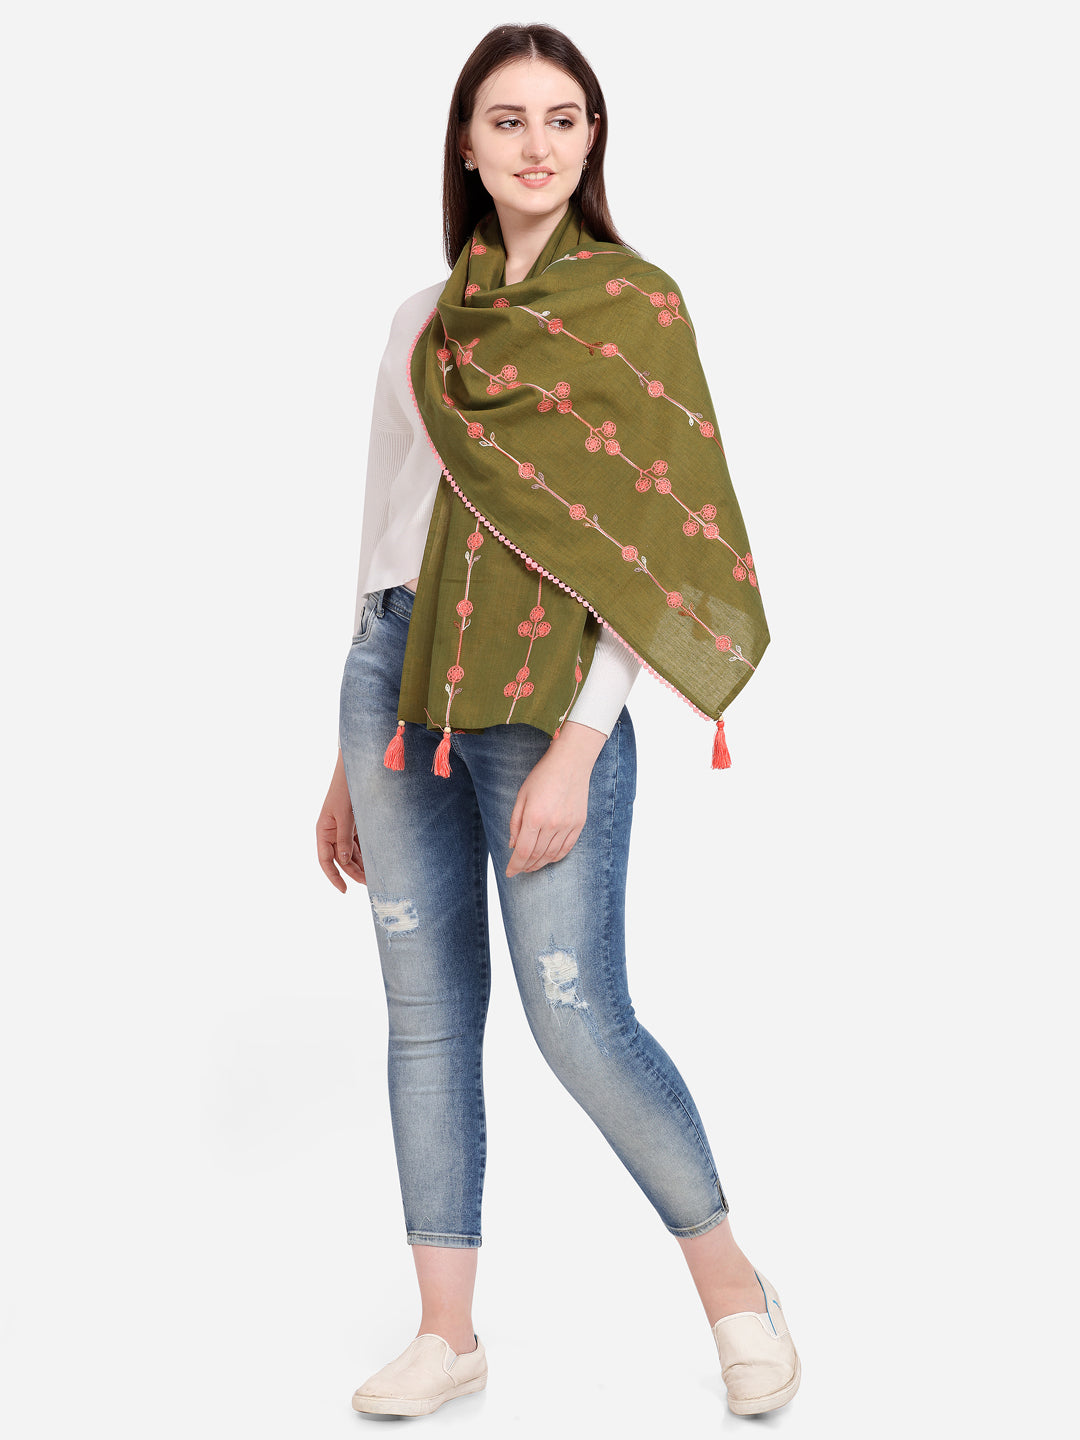 Women's   Tiny Floral Bunch Olive Green Embroidered Stole  - MESMORA FASHIONS